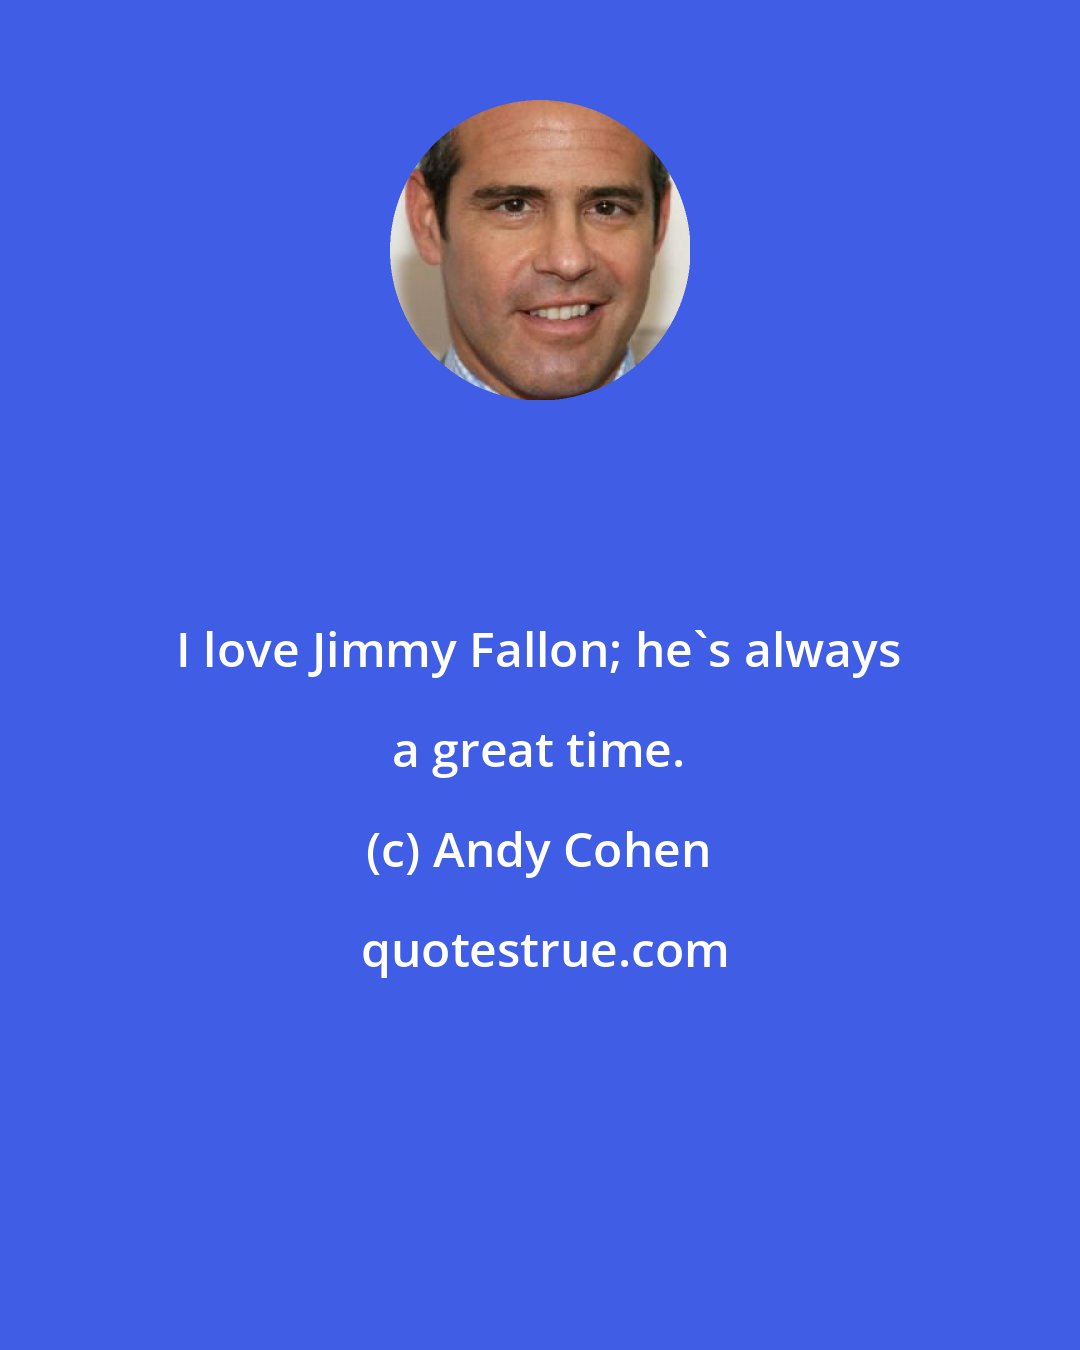 Andy Cohen: I love Jimmy Fallon; he's always a great time.